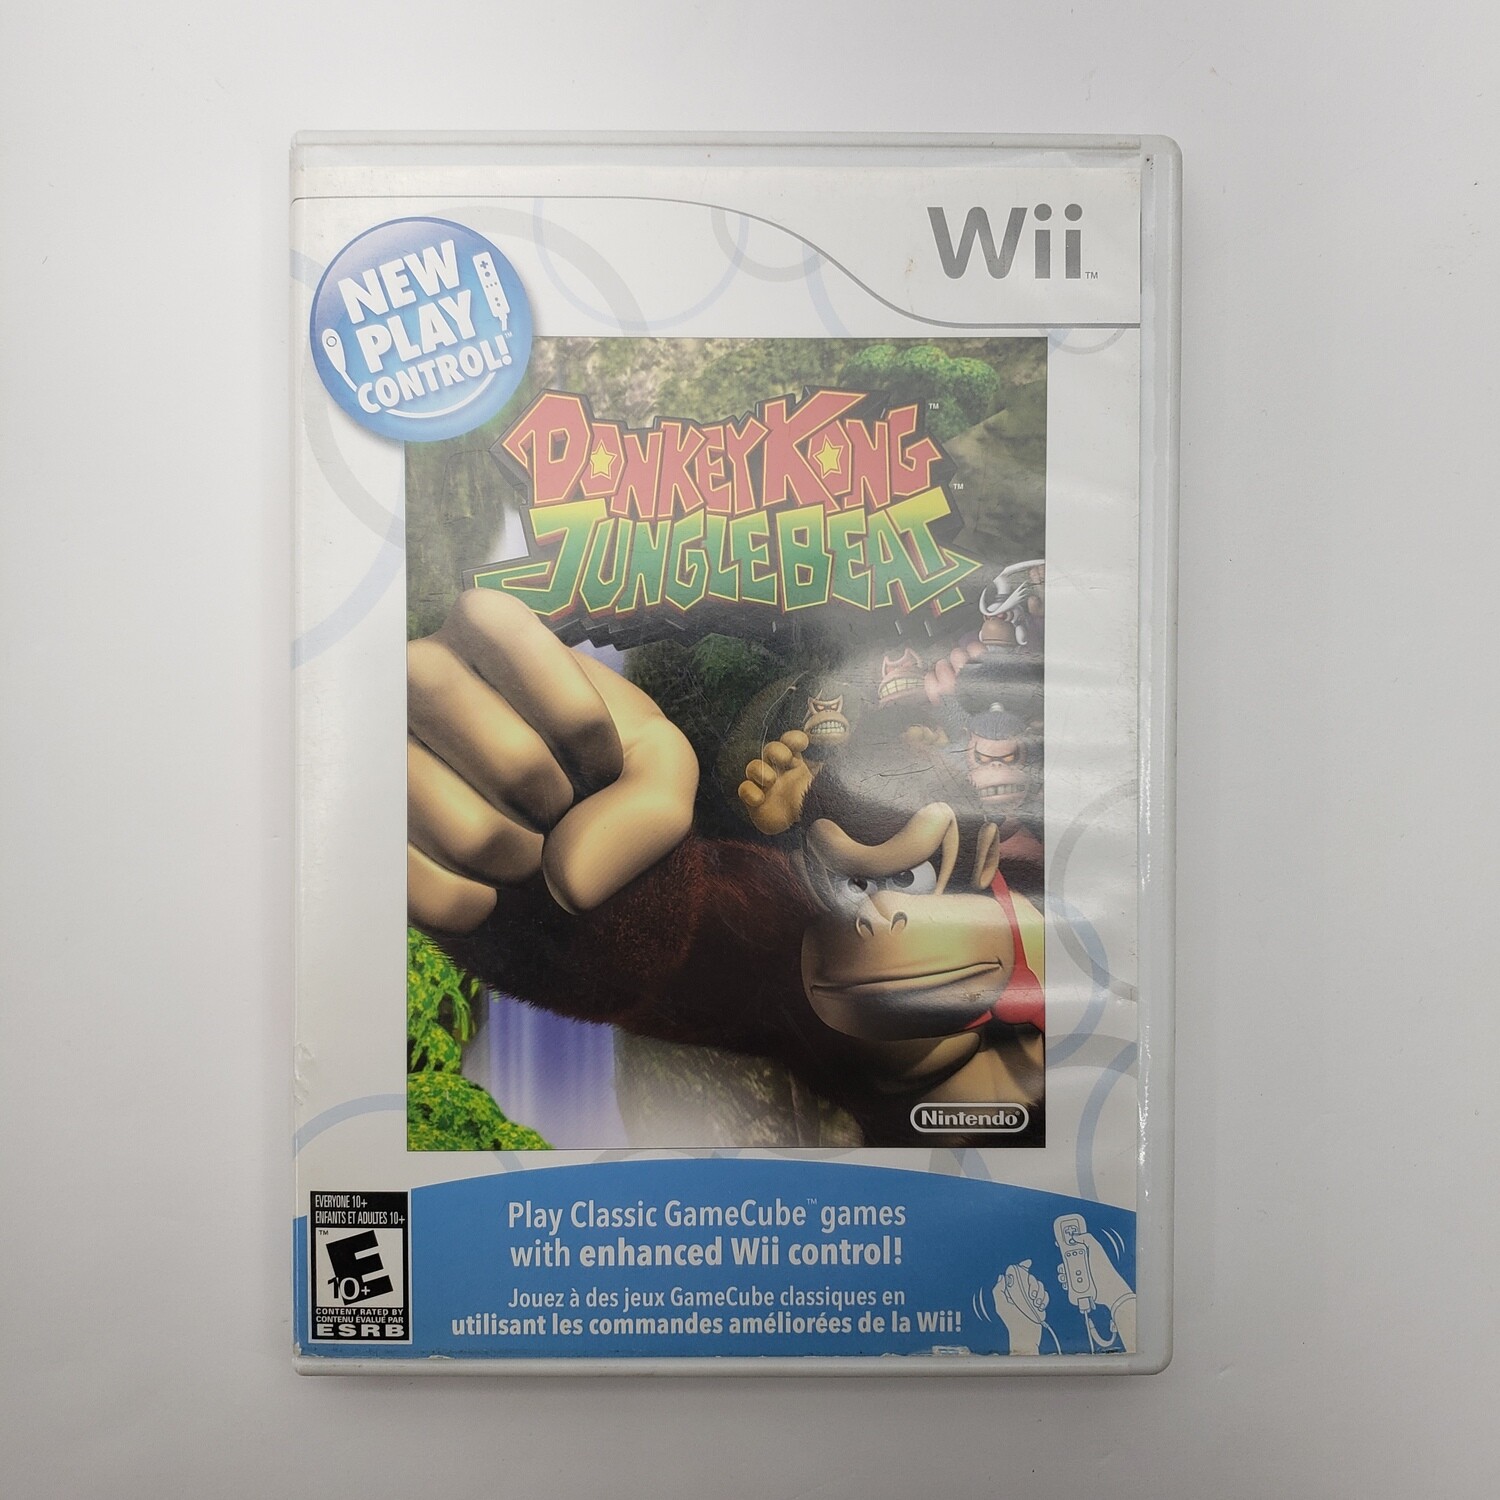 Donkey Kong: Jungle Beat Video Game for Wii - Used